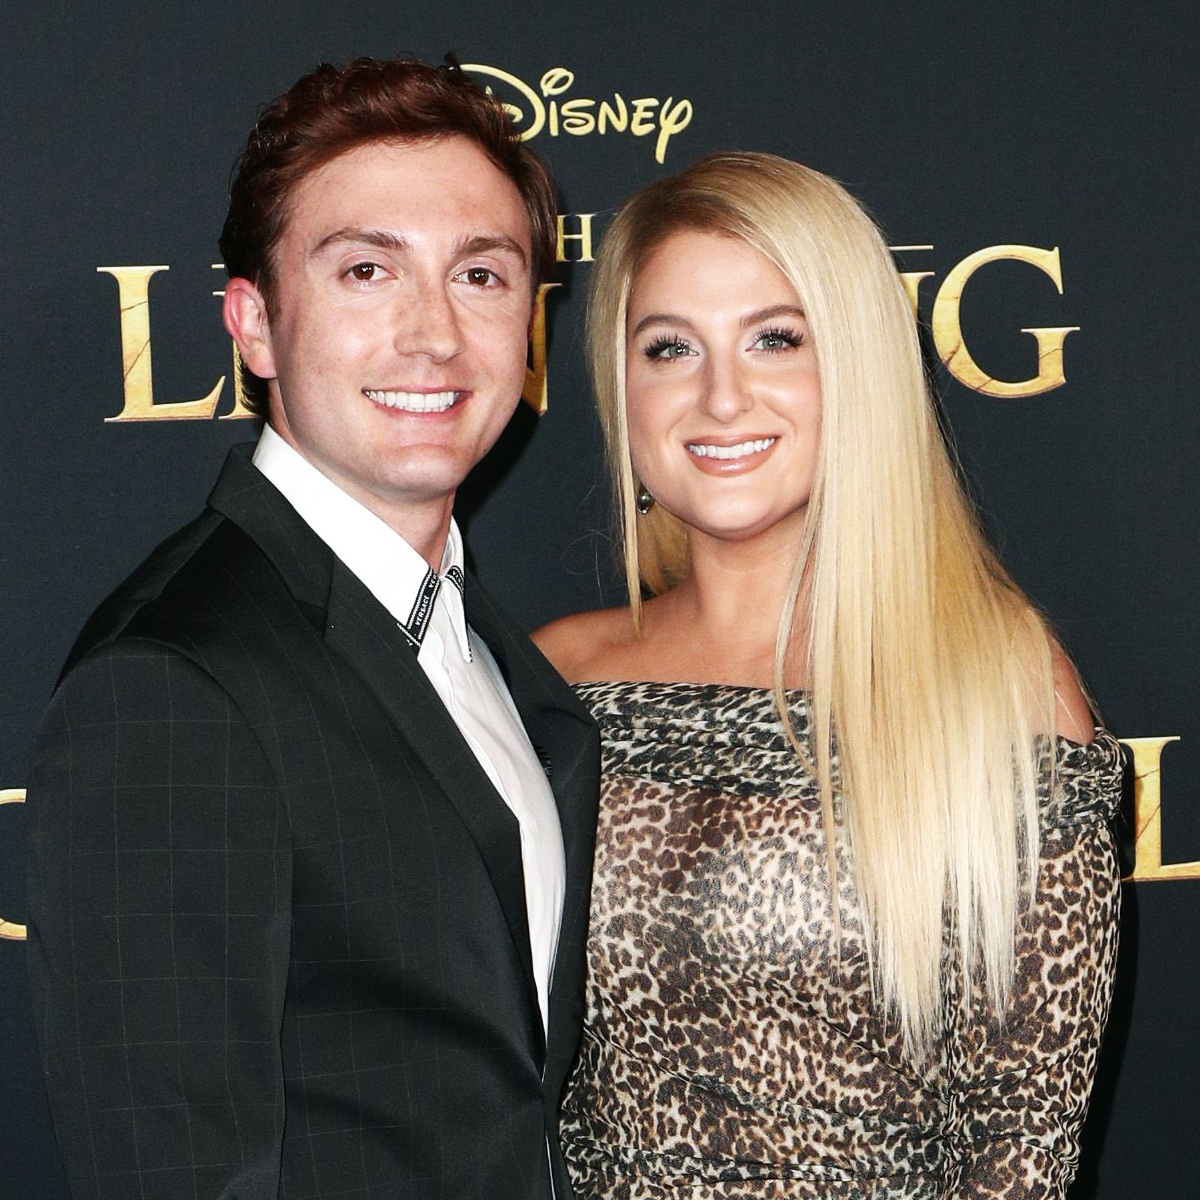 Meghan Trainor gives birth to second son with Daryl Sabara